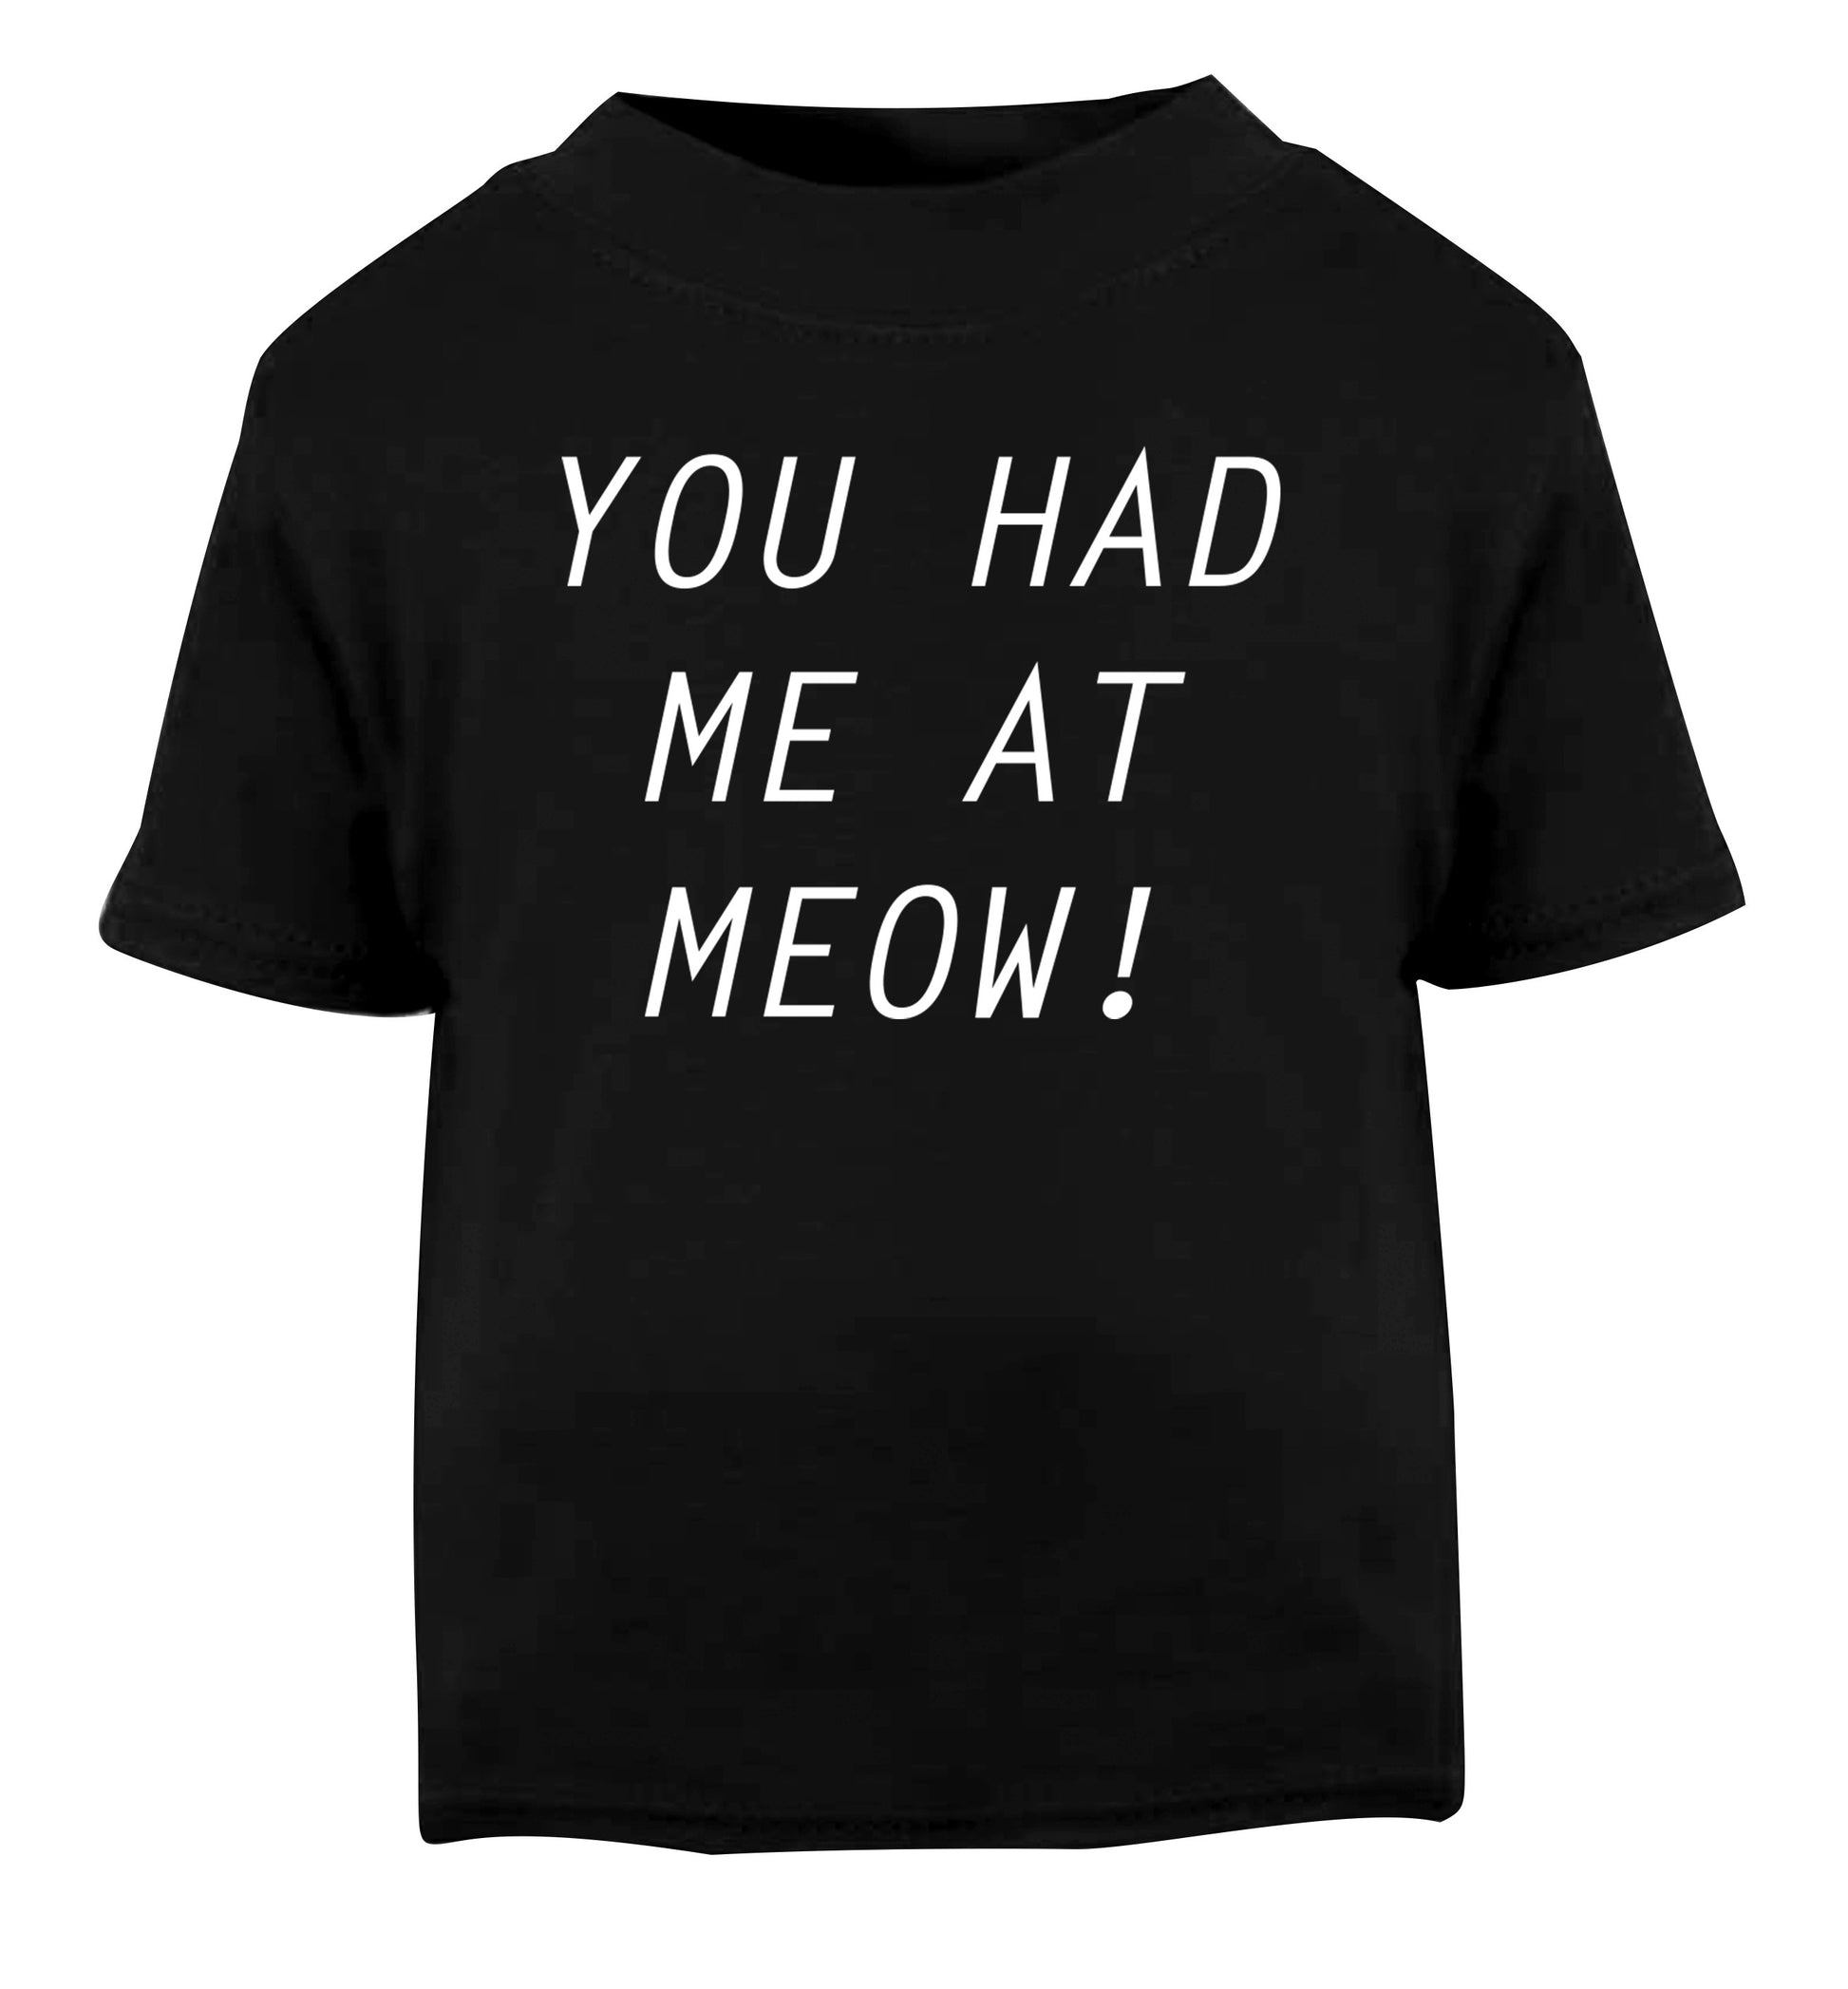 You had me at meow Black Baby Toddler Tshirt 2 years